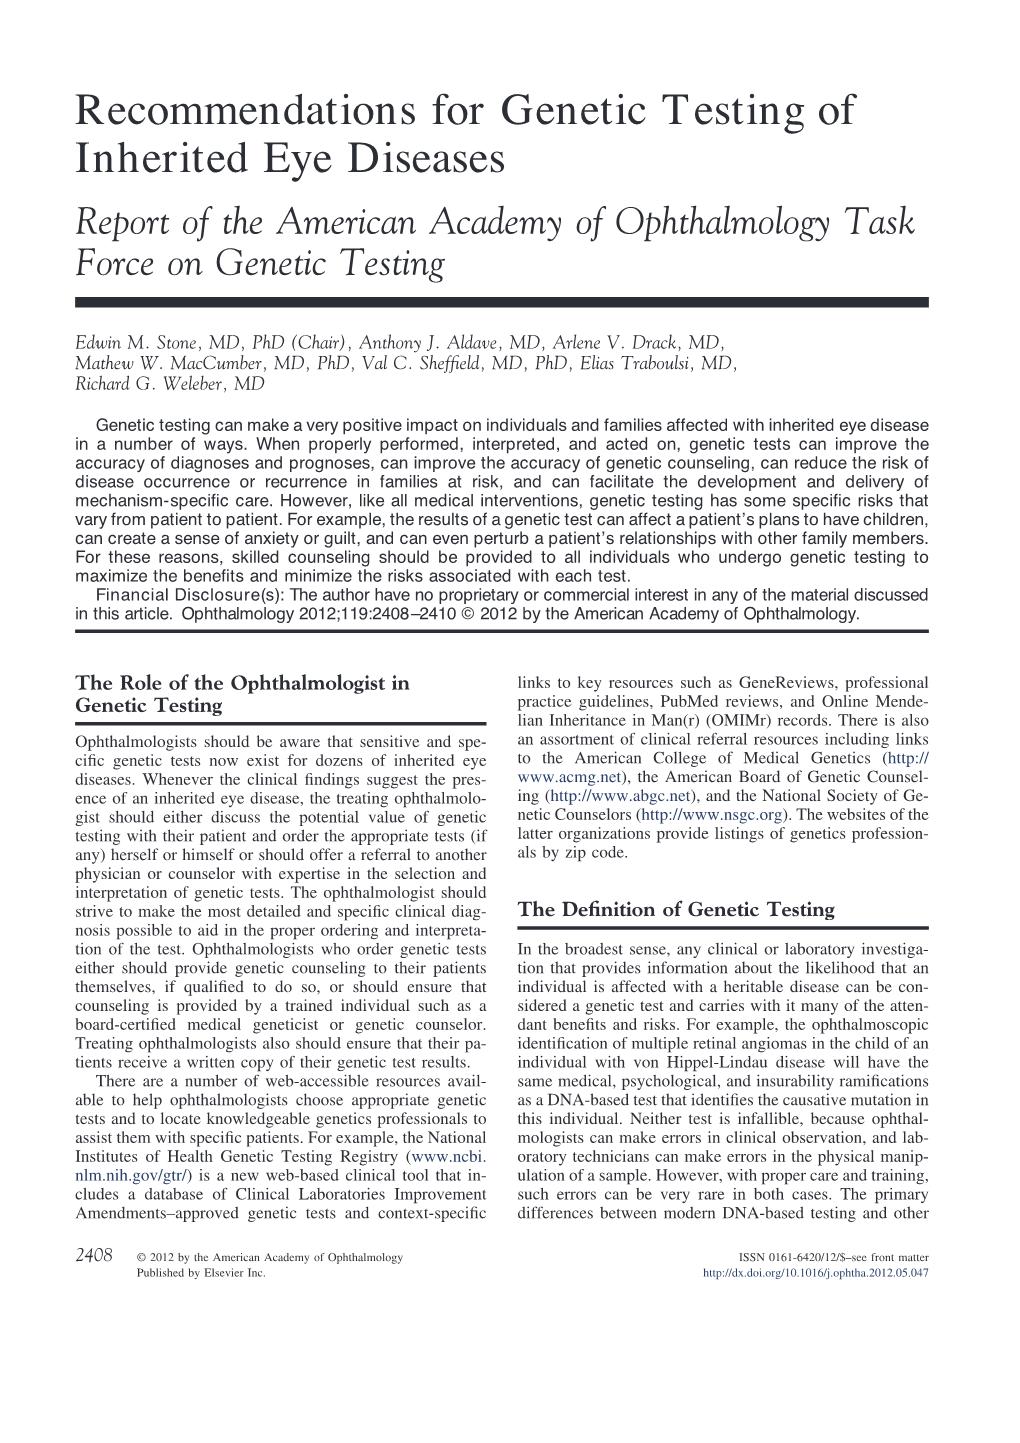 Recommendations for Genetic Testing of Inherited Eye Diseases Report of the American Academy of Ophthalmology Task Force on Genetic Testing